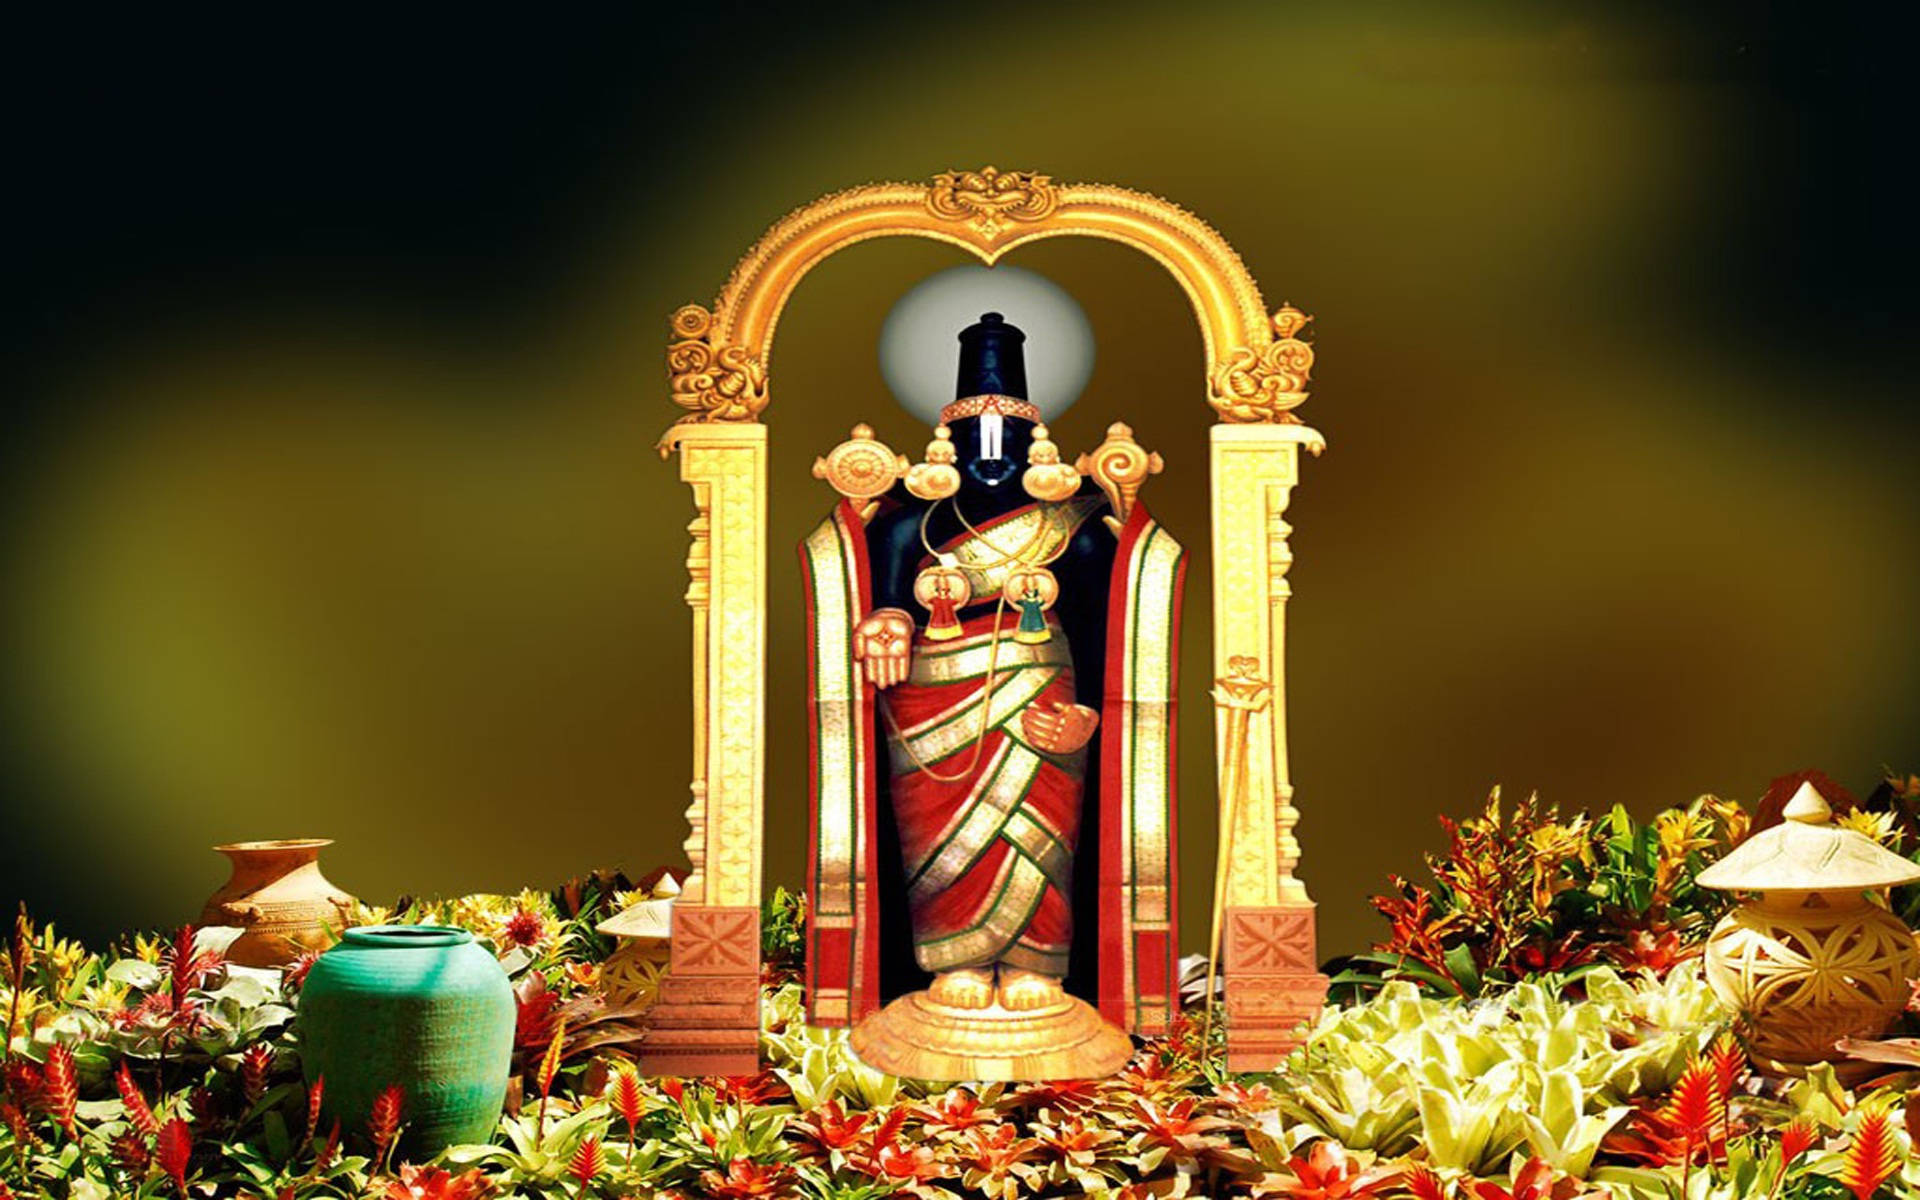 "Sacred Figure of Lord Venkateswara surrounded by Divine Flowers and Pots" Wallpaper